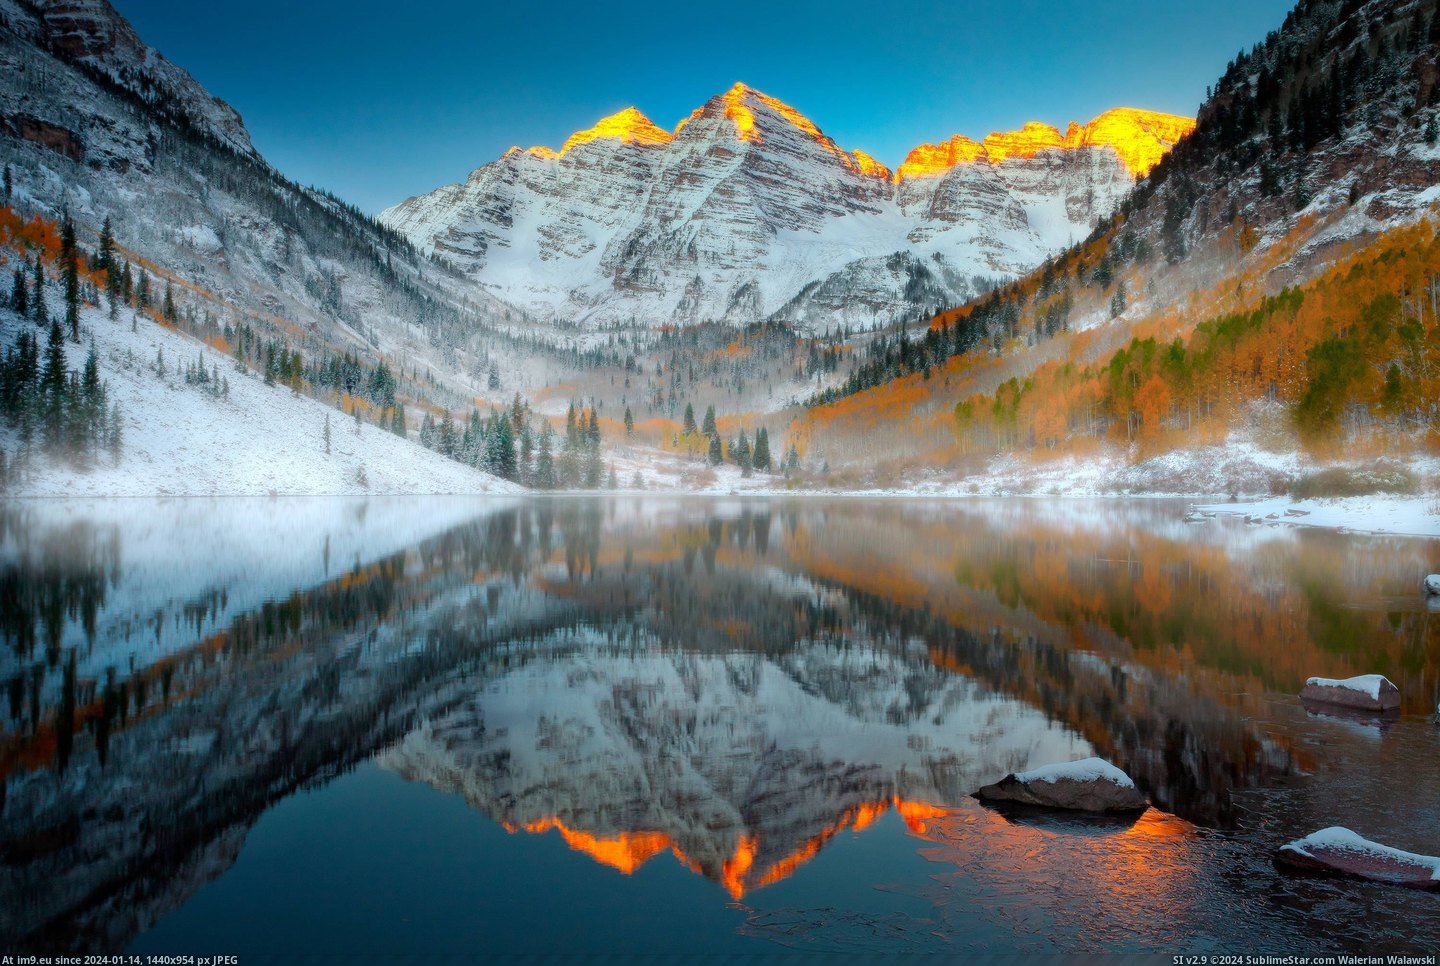 #Winter #Colorado #Sunrise #Aspen #Maroon #Mcneal #Wilderness #Kevin #Bells [Earthporn] Maroon Bells Sunrise In Winter - Maroon Bells Wilderness, Aspen, Colorado [3,000x2000] by Kevin McNeal Pic. (Bild von album My r/EARTHPORN favs))